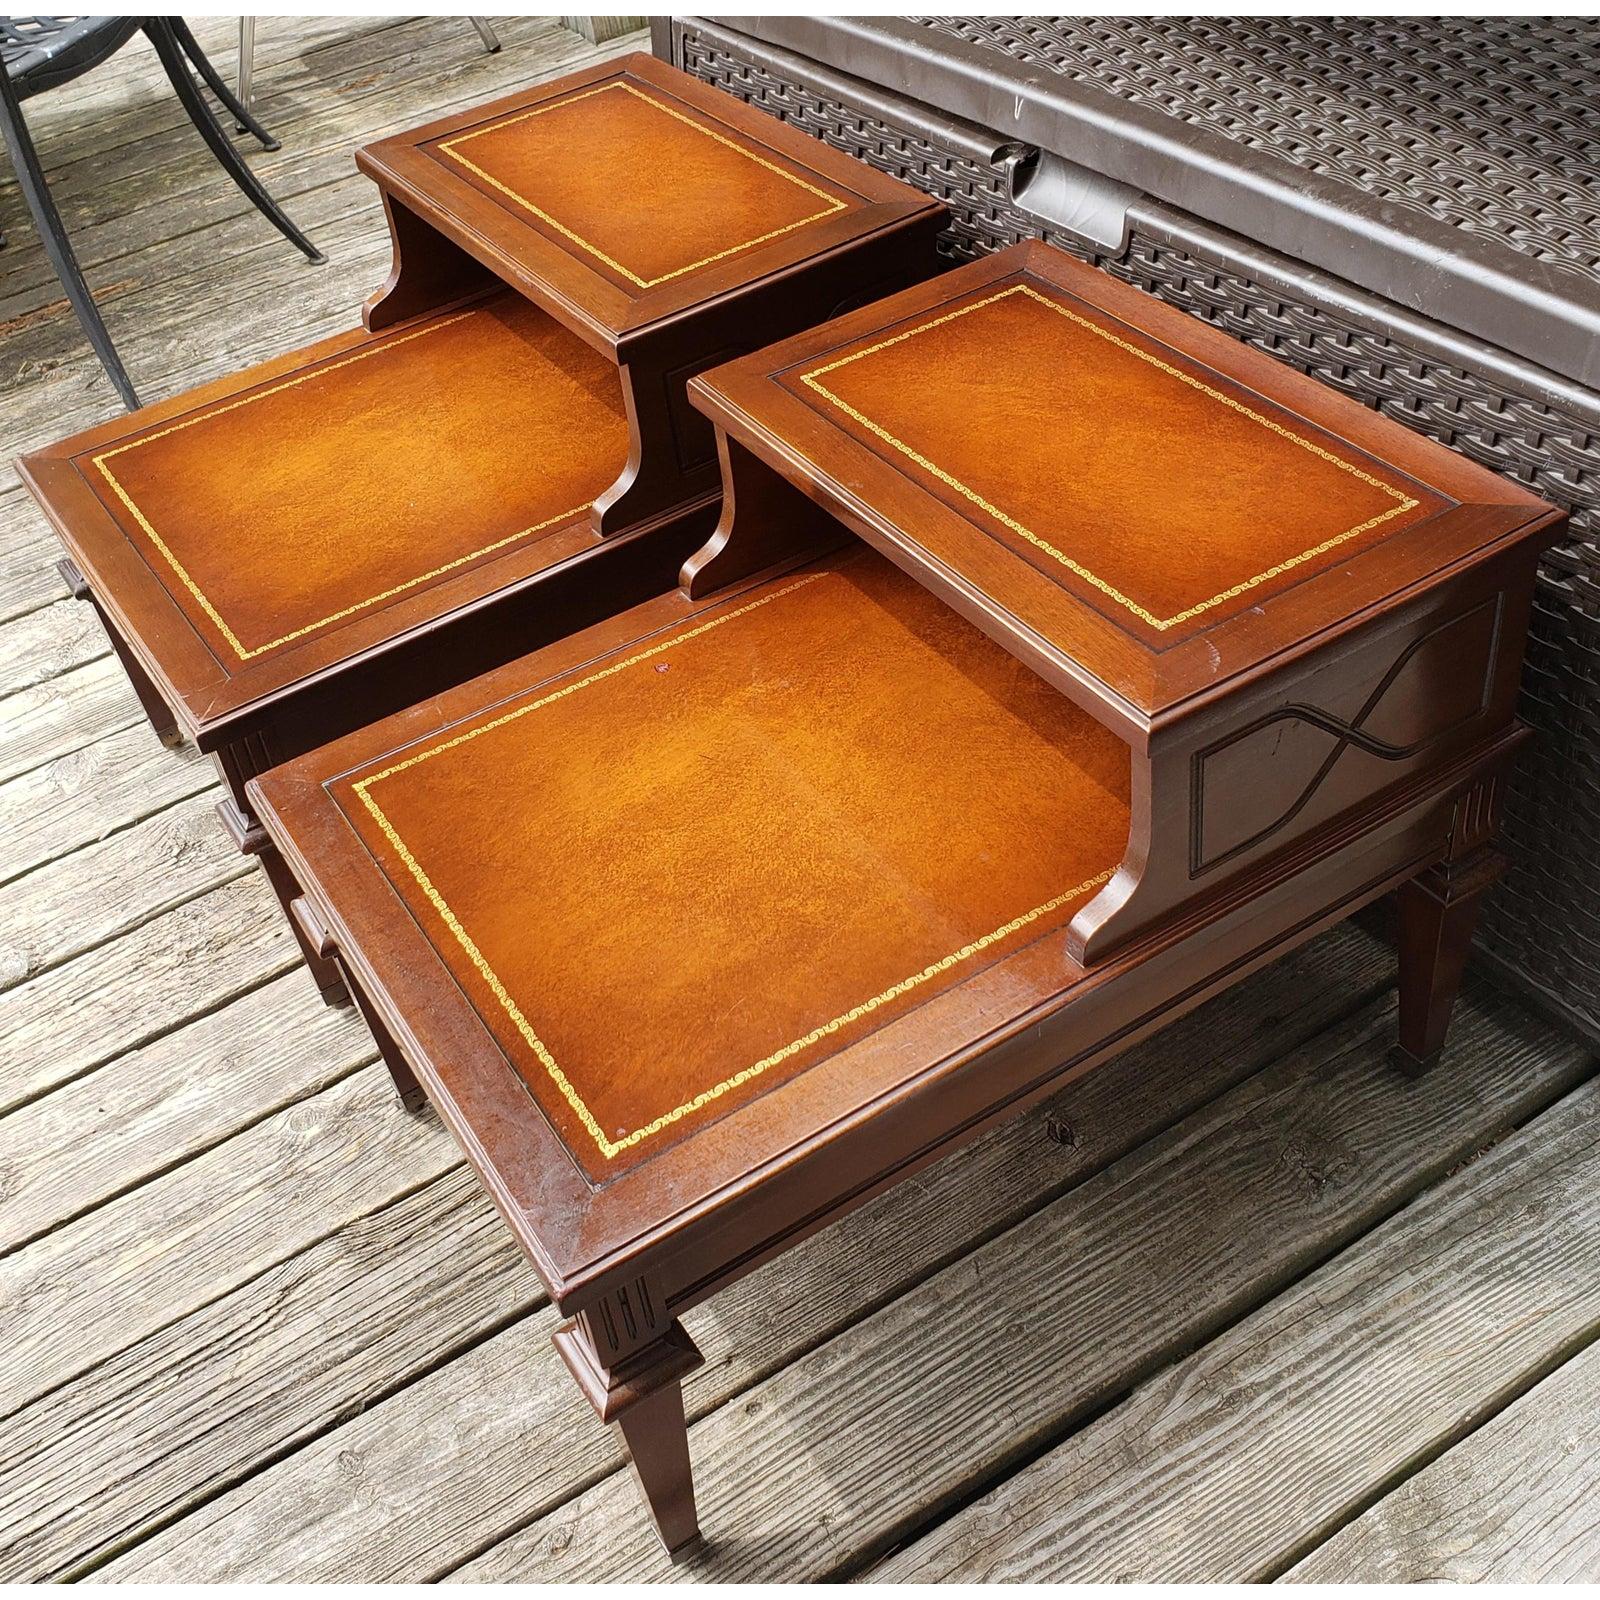 20th Century Mersman Two Tier Mahogany Tables with Leather Top Inserts Circa 1960s, a Pair For Sale